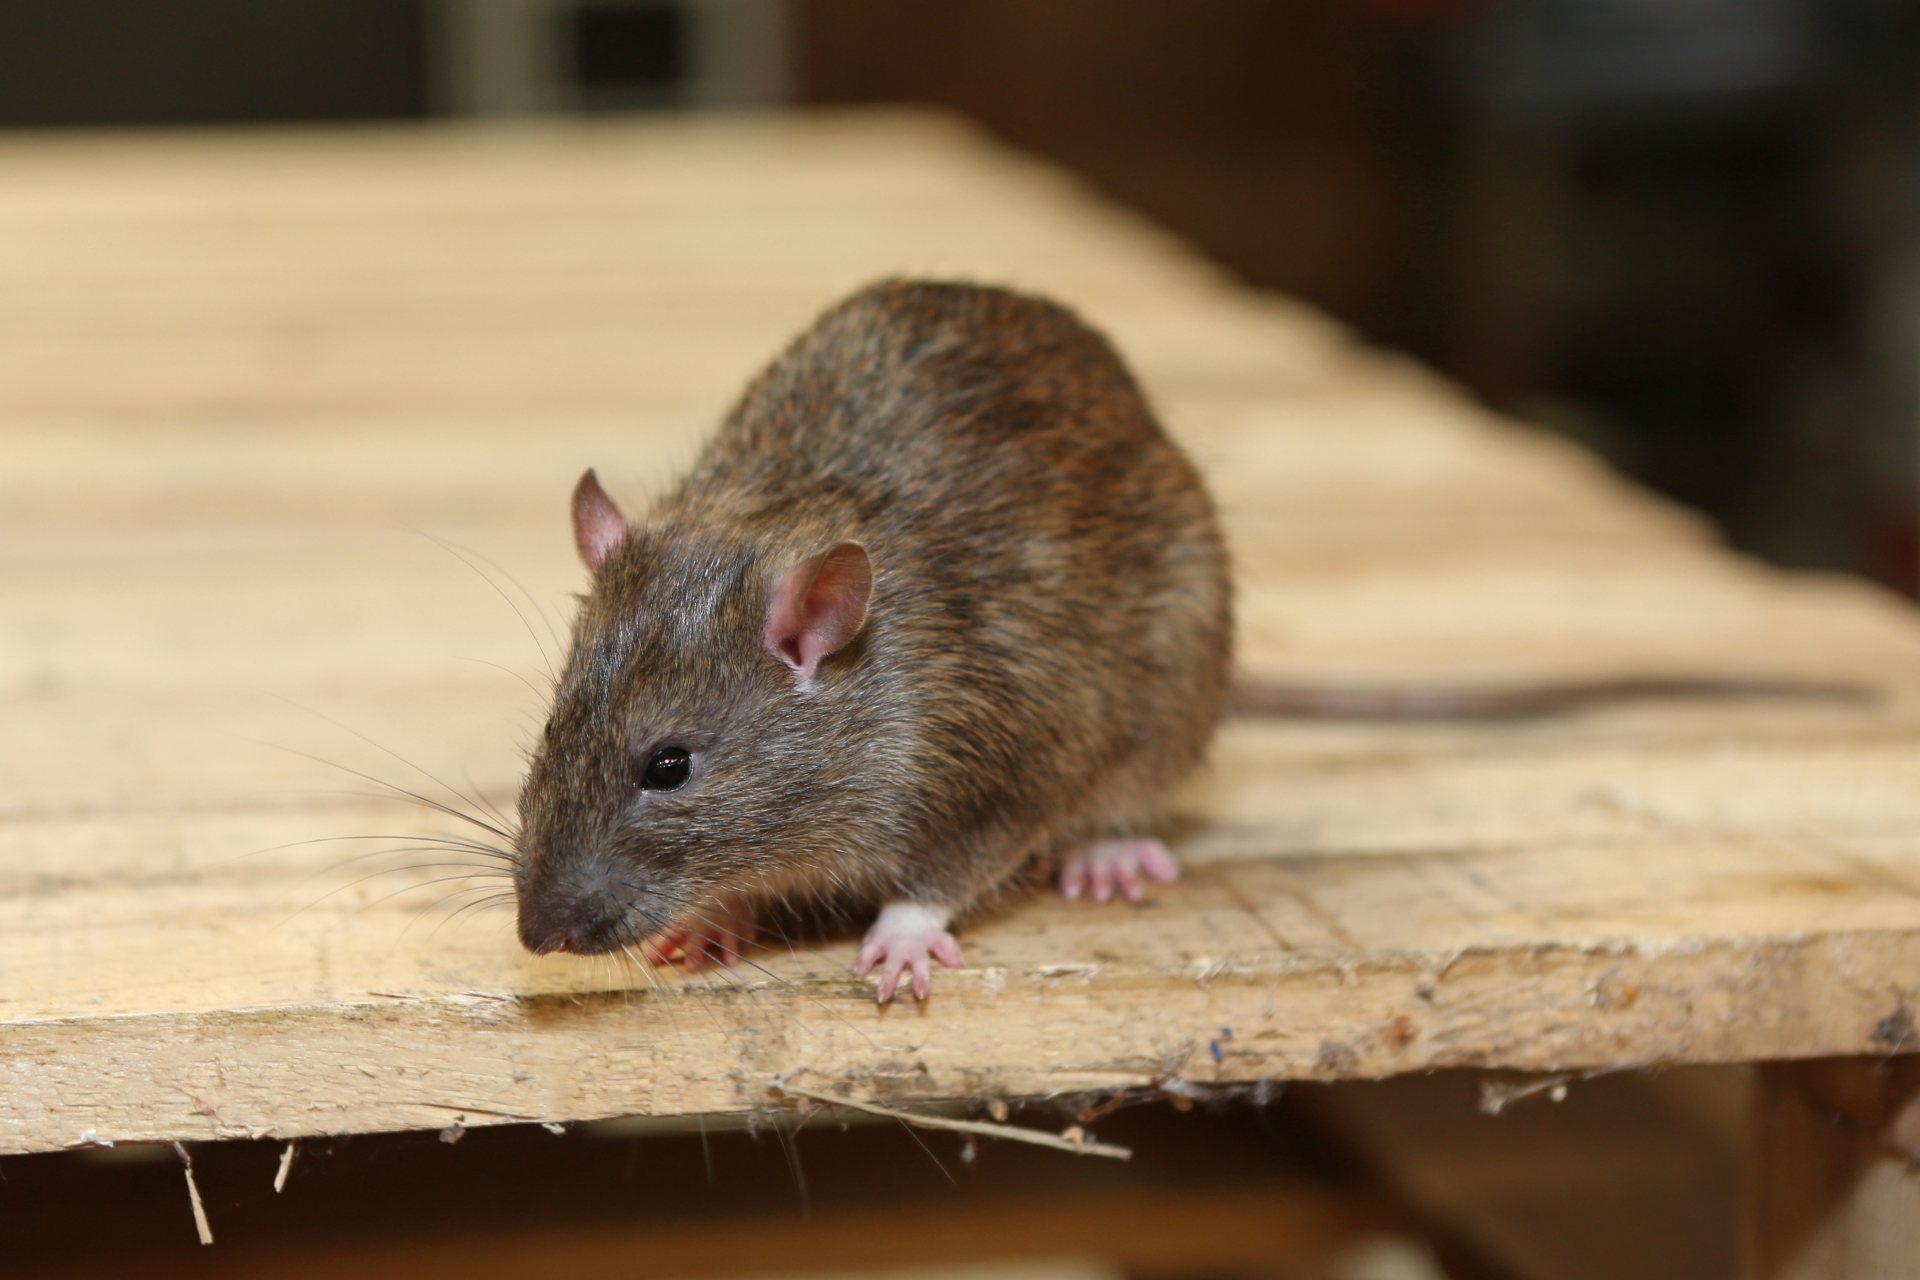 Rat extermination, Pest Control in Dalston, E8. Call Now 020 8166 9746